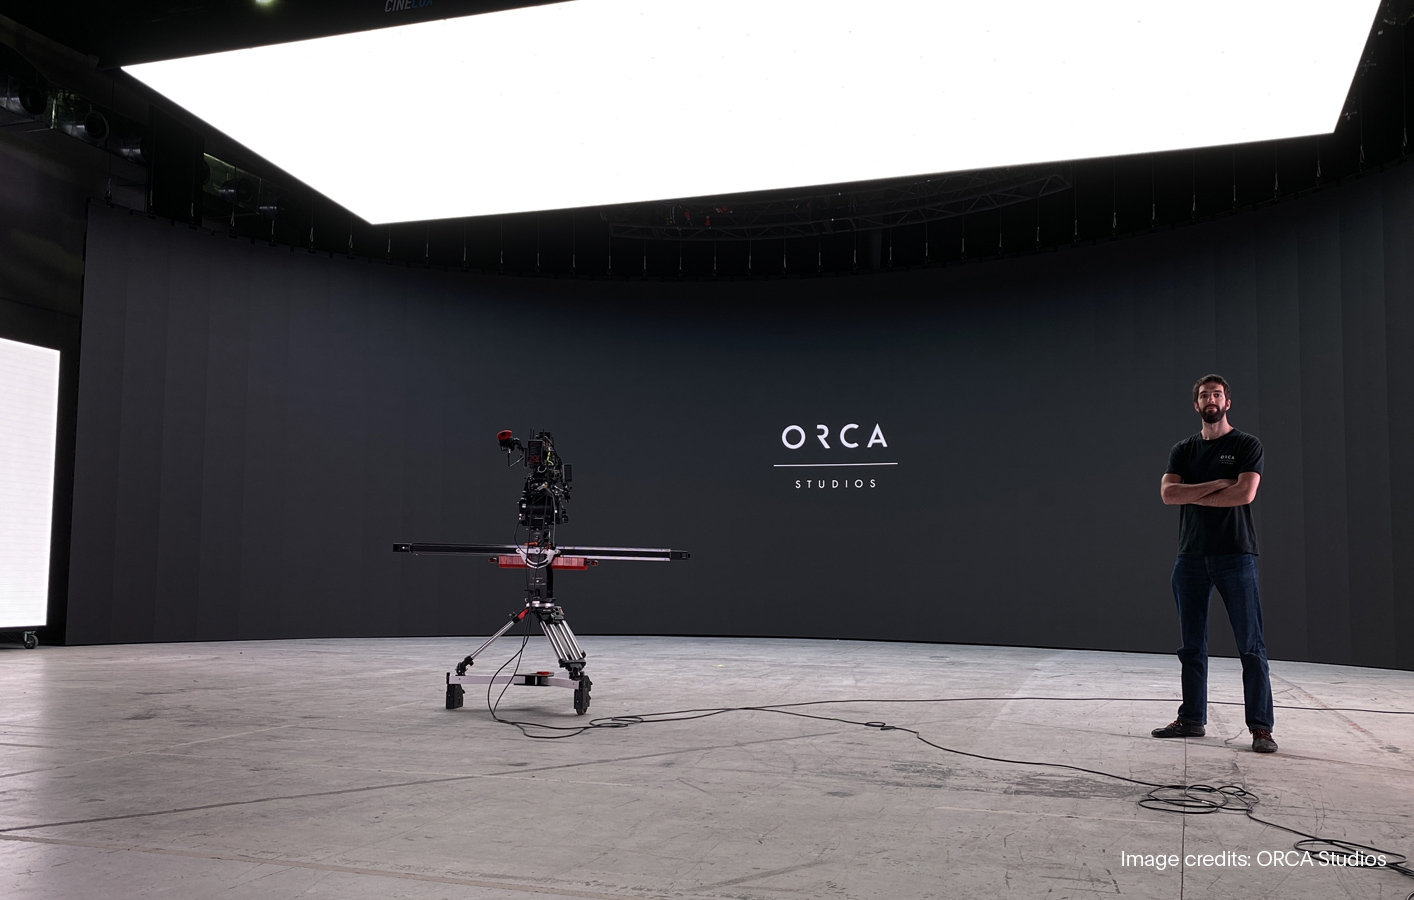 Meet Orca: the Spanish-based trailblazers in virtual production